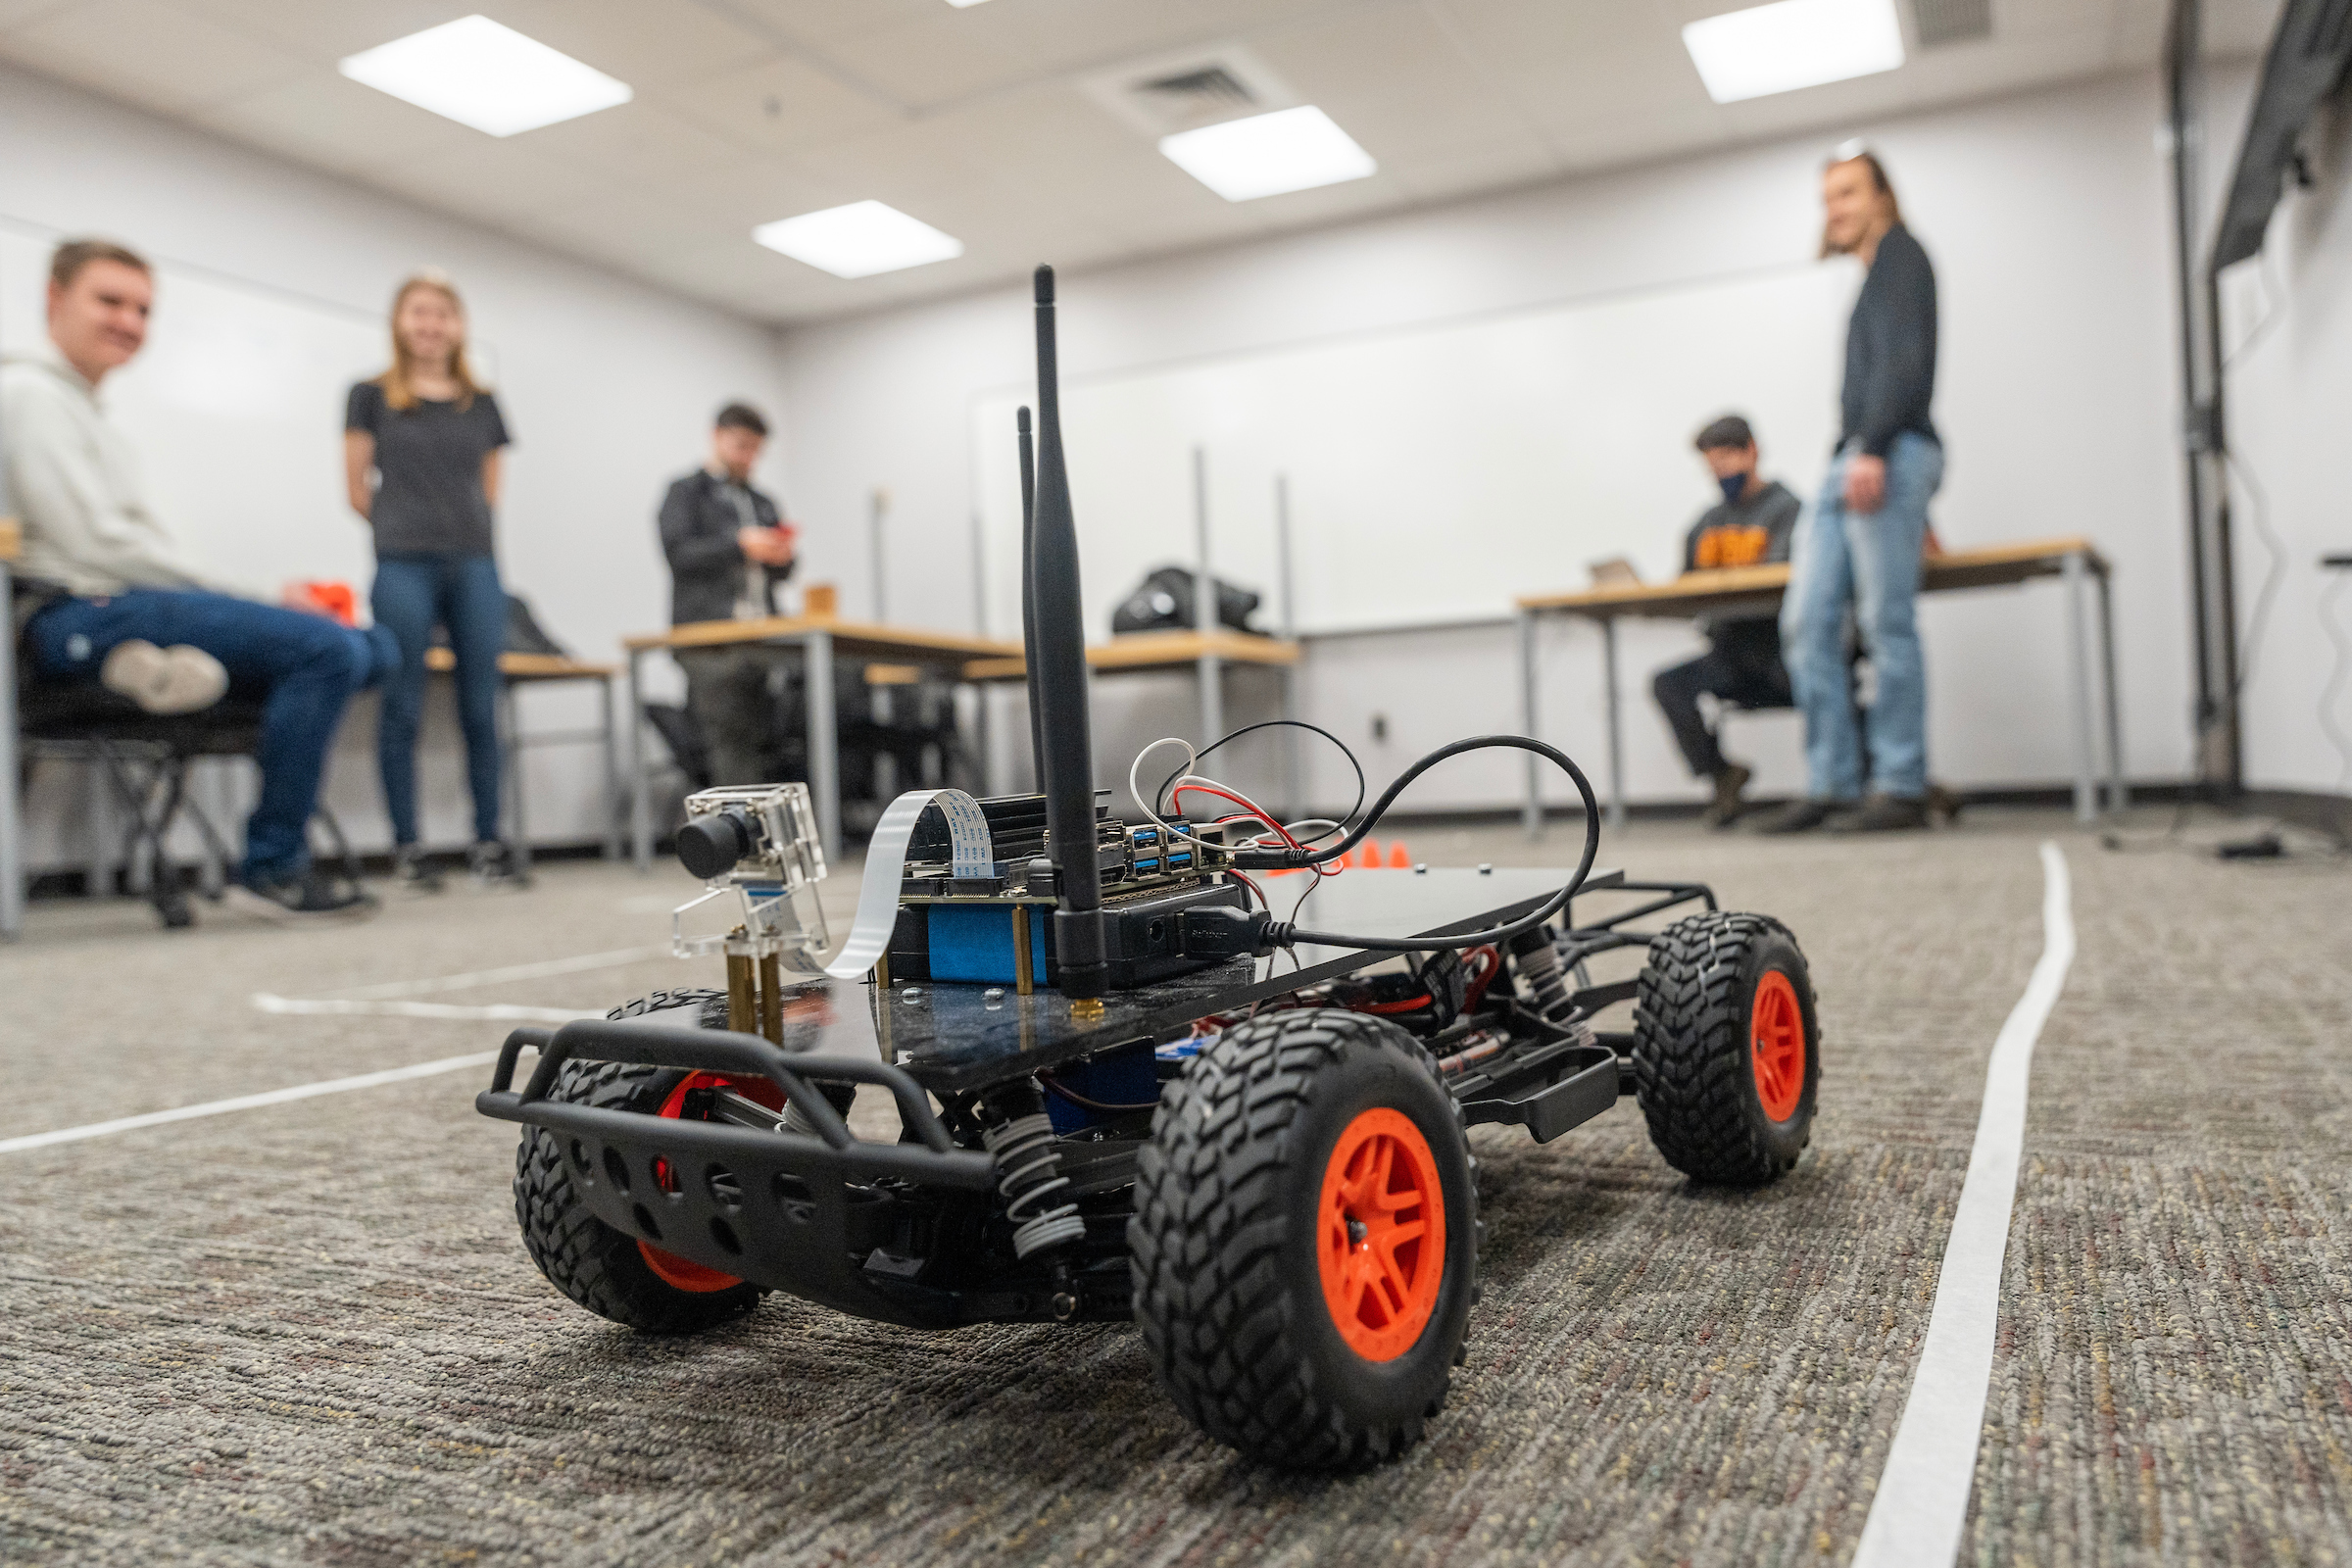 A small black robot on an obstacle course with four students and an instructor in the background.